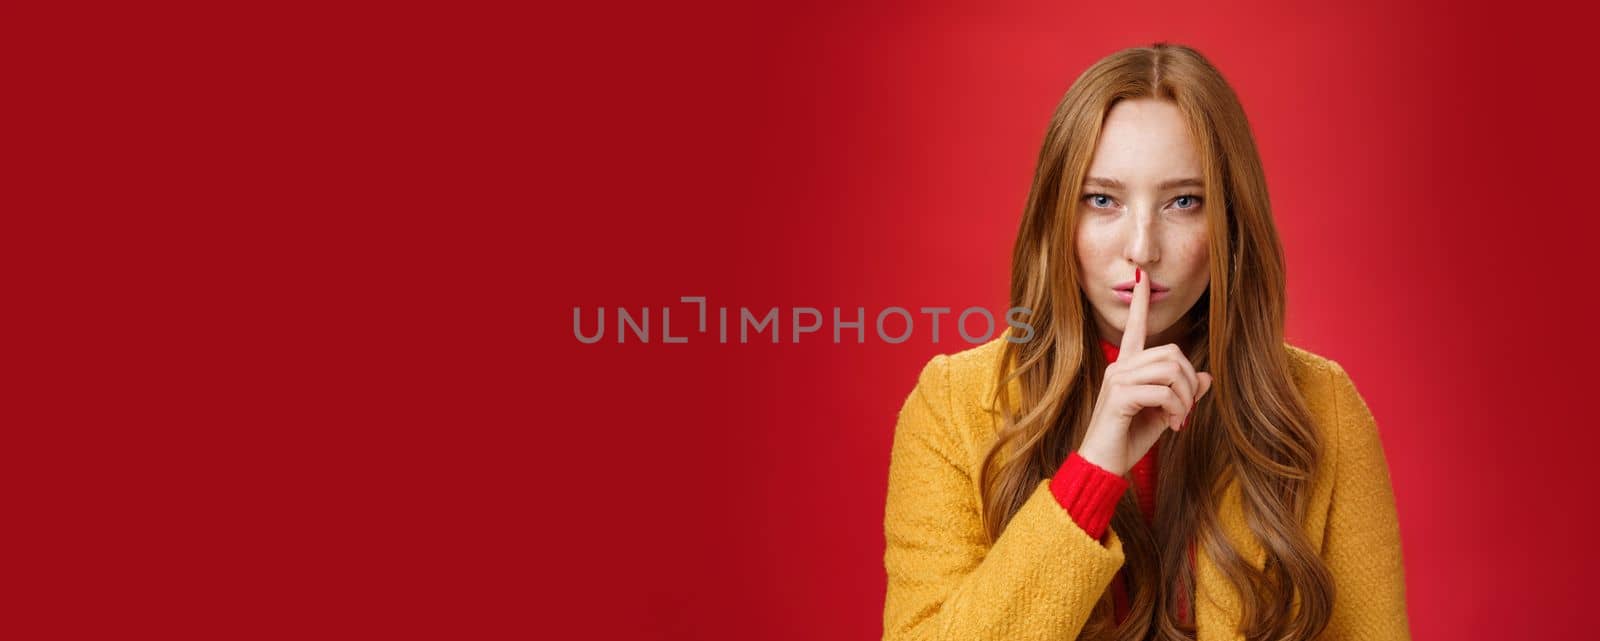 Shh keep out secret safe. Portrait of sensual attractive and daring redhead female in yellow coat showing shush gesture with index finger on lips, squinting looking determined and sassy over red wall.